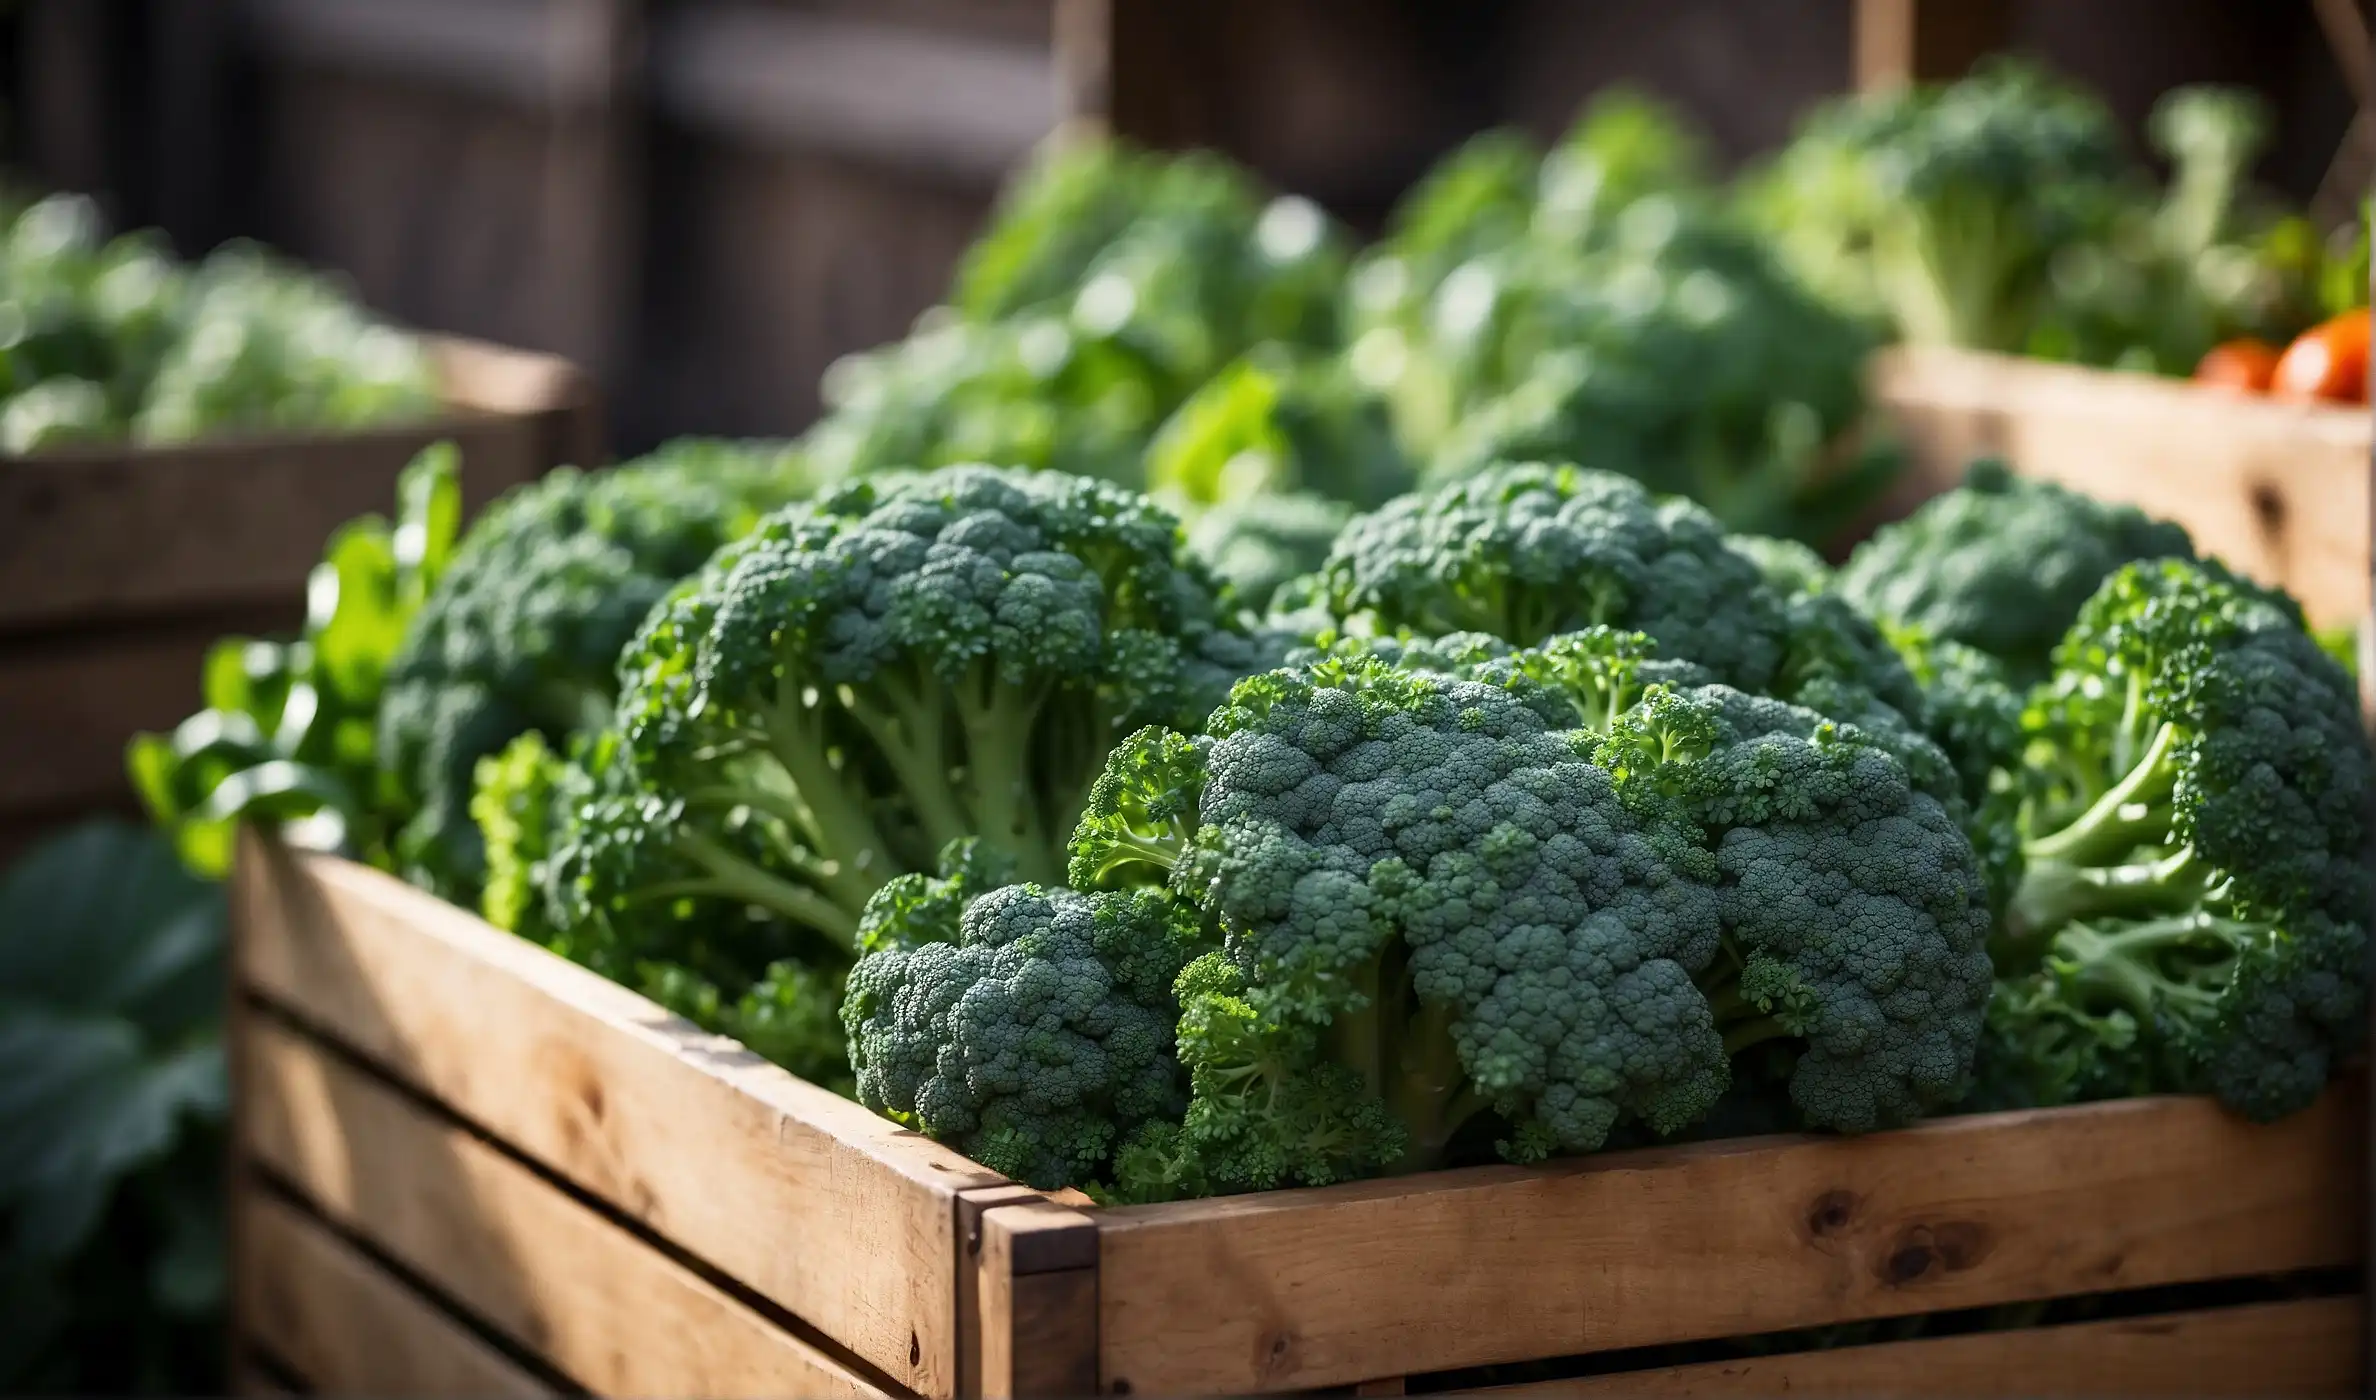 What Vegetable Family Does Calabrese Broccoli Belong To?